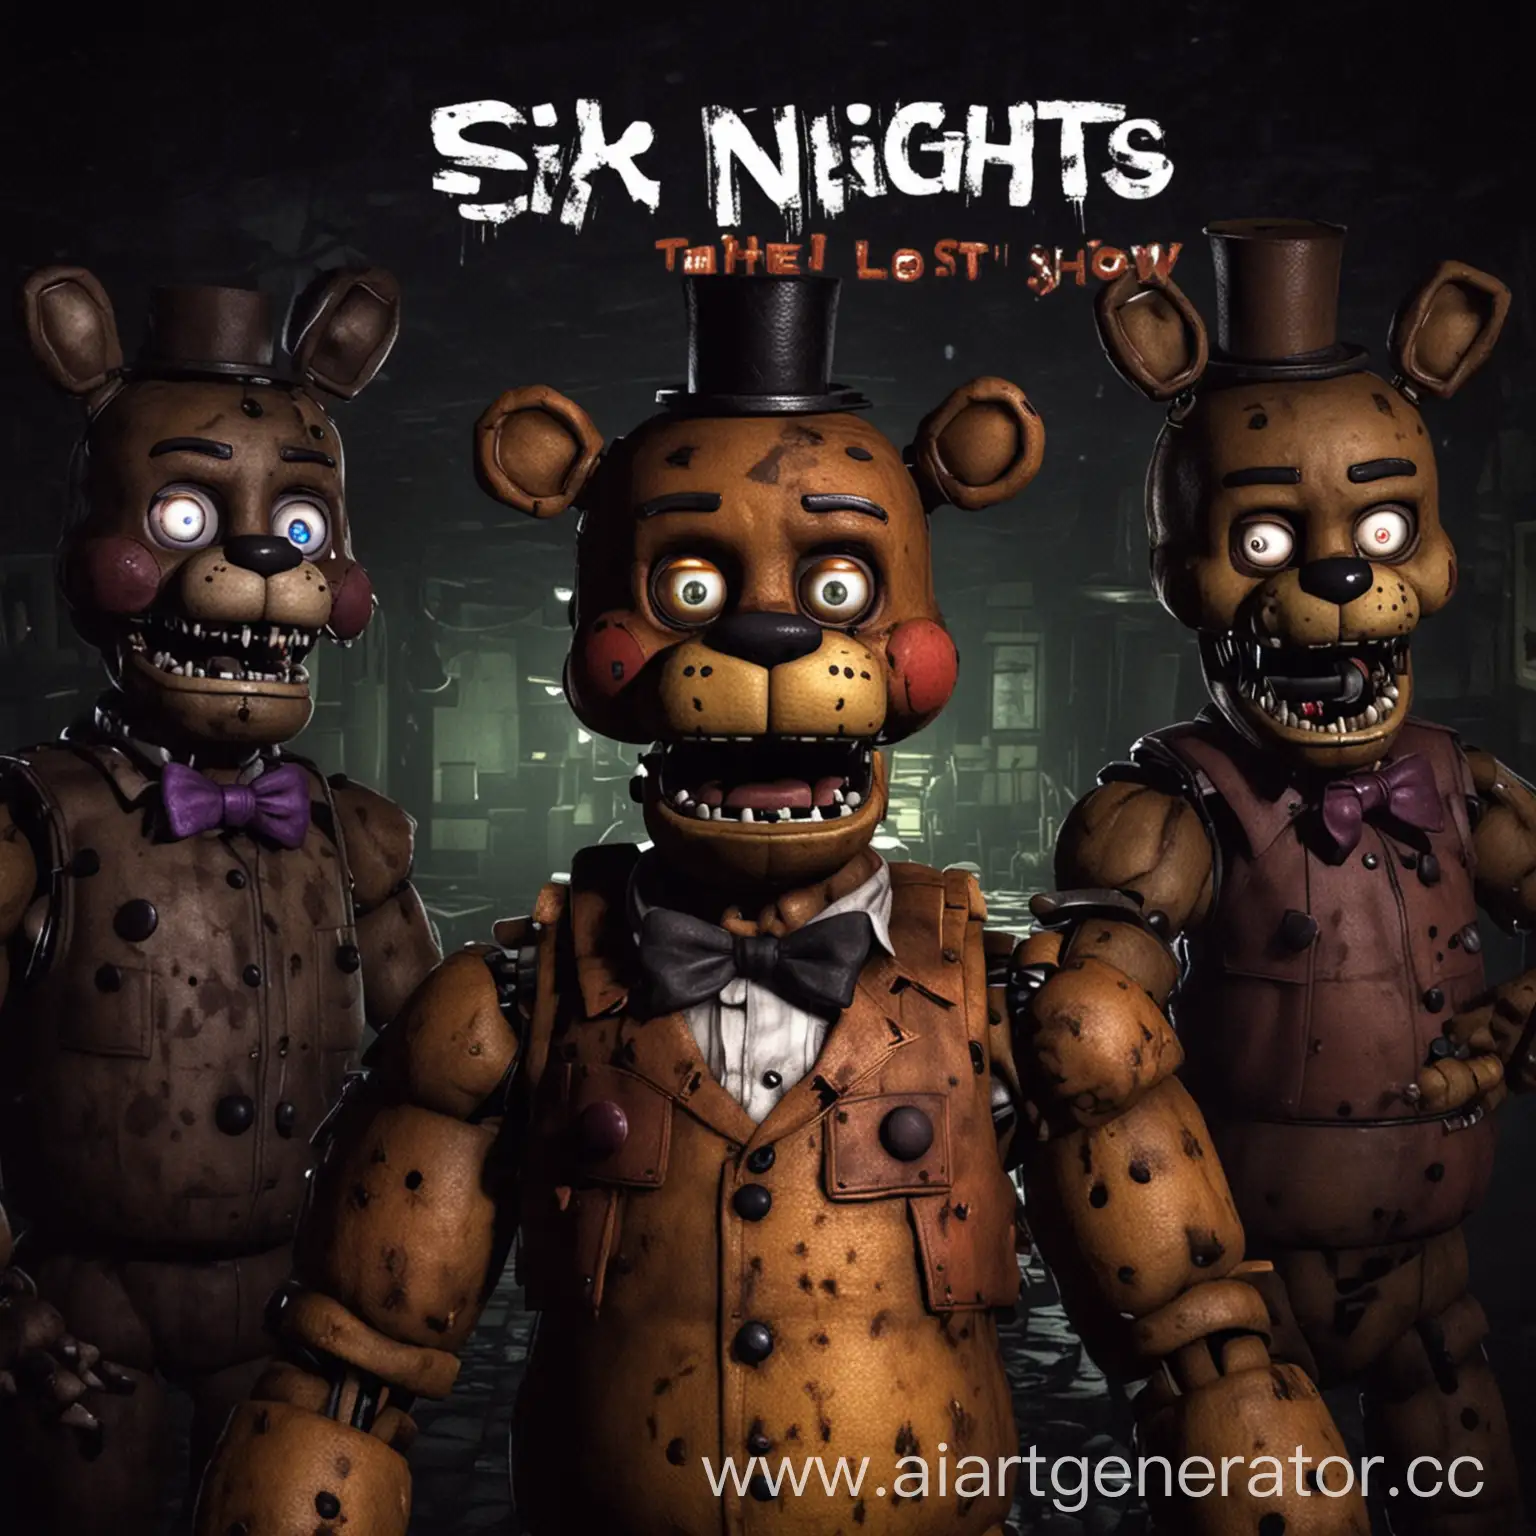 Terrifying-Nights-at-Fnaf-Games-The-Mysterious-Lost-Show-360-Degree-Experience